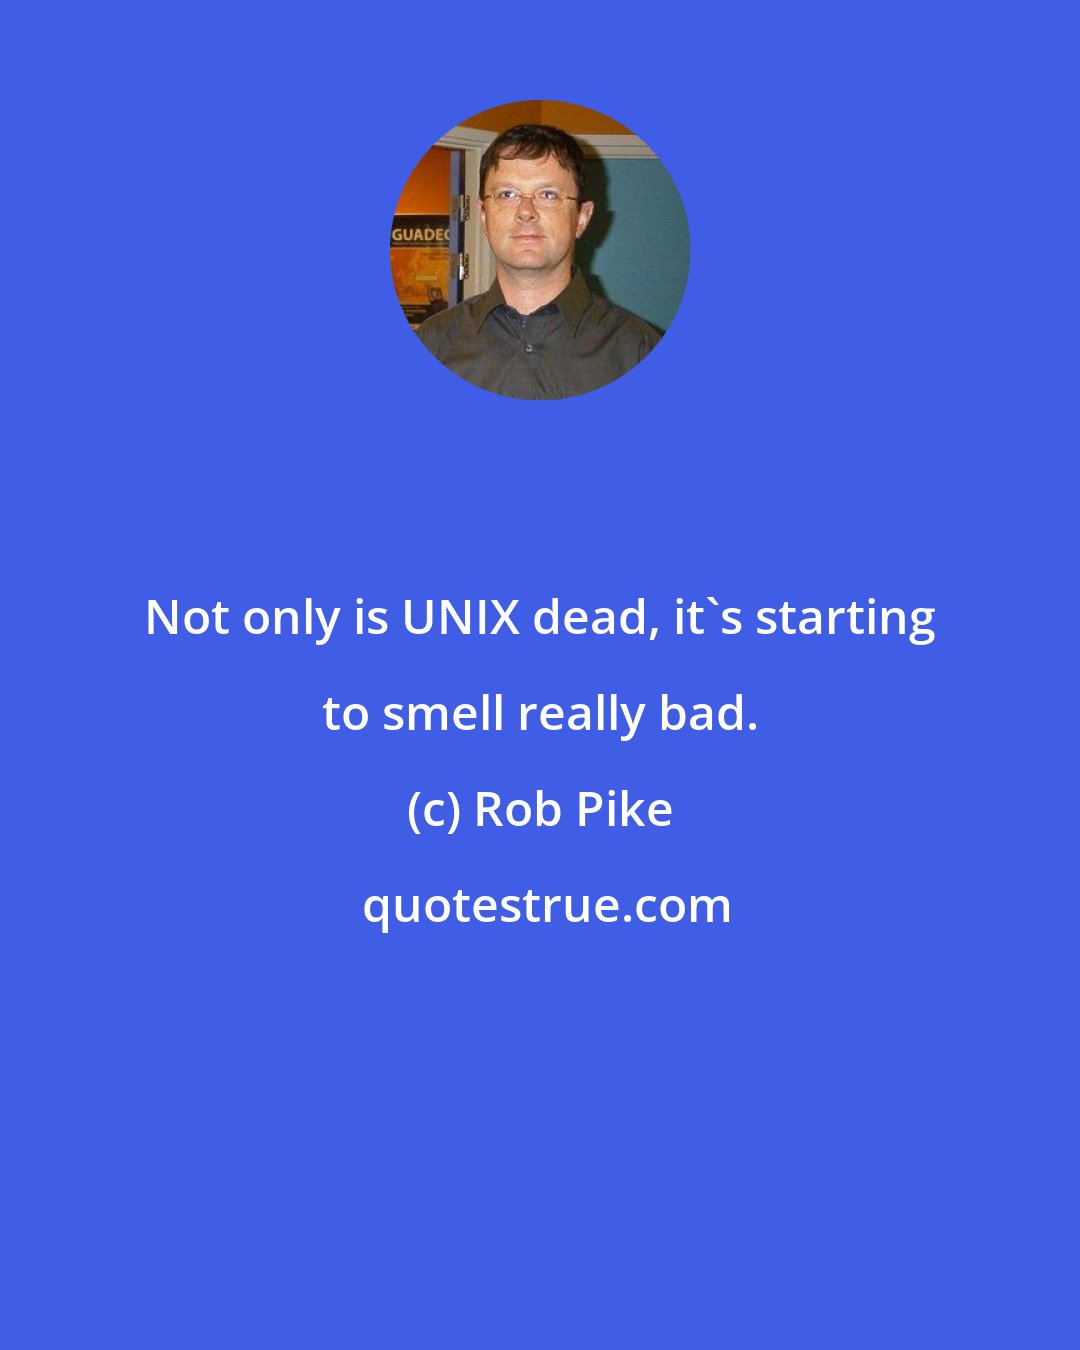 Rob Pike: Not only is UNIX dead, it's starting to smell really bad.